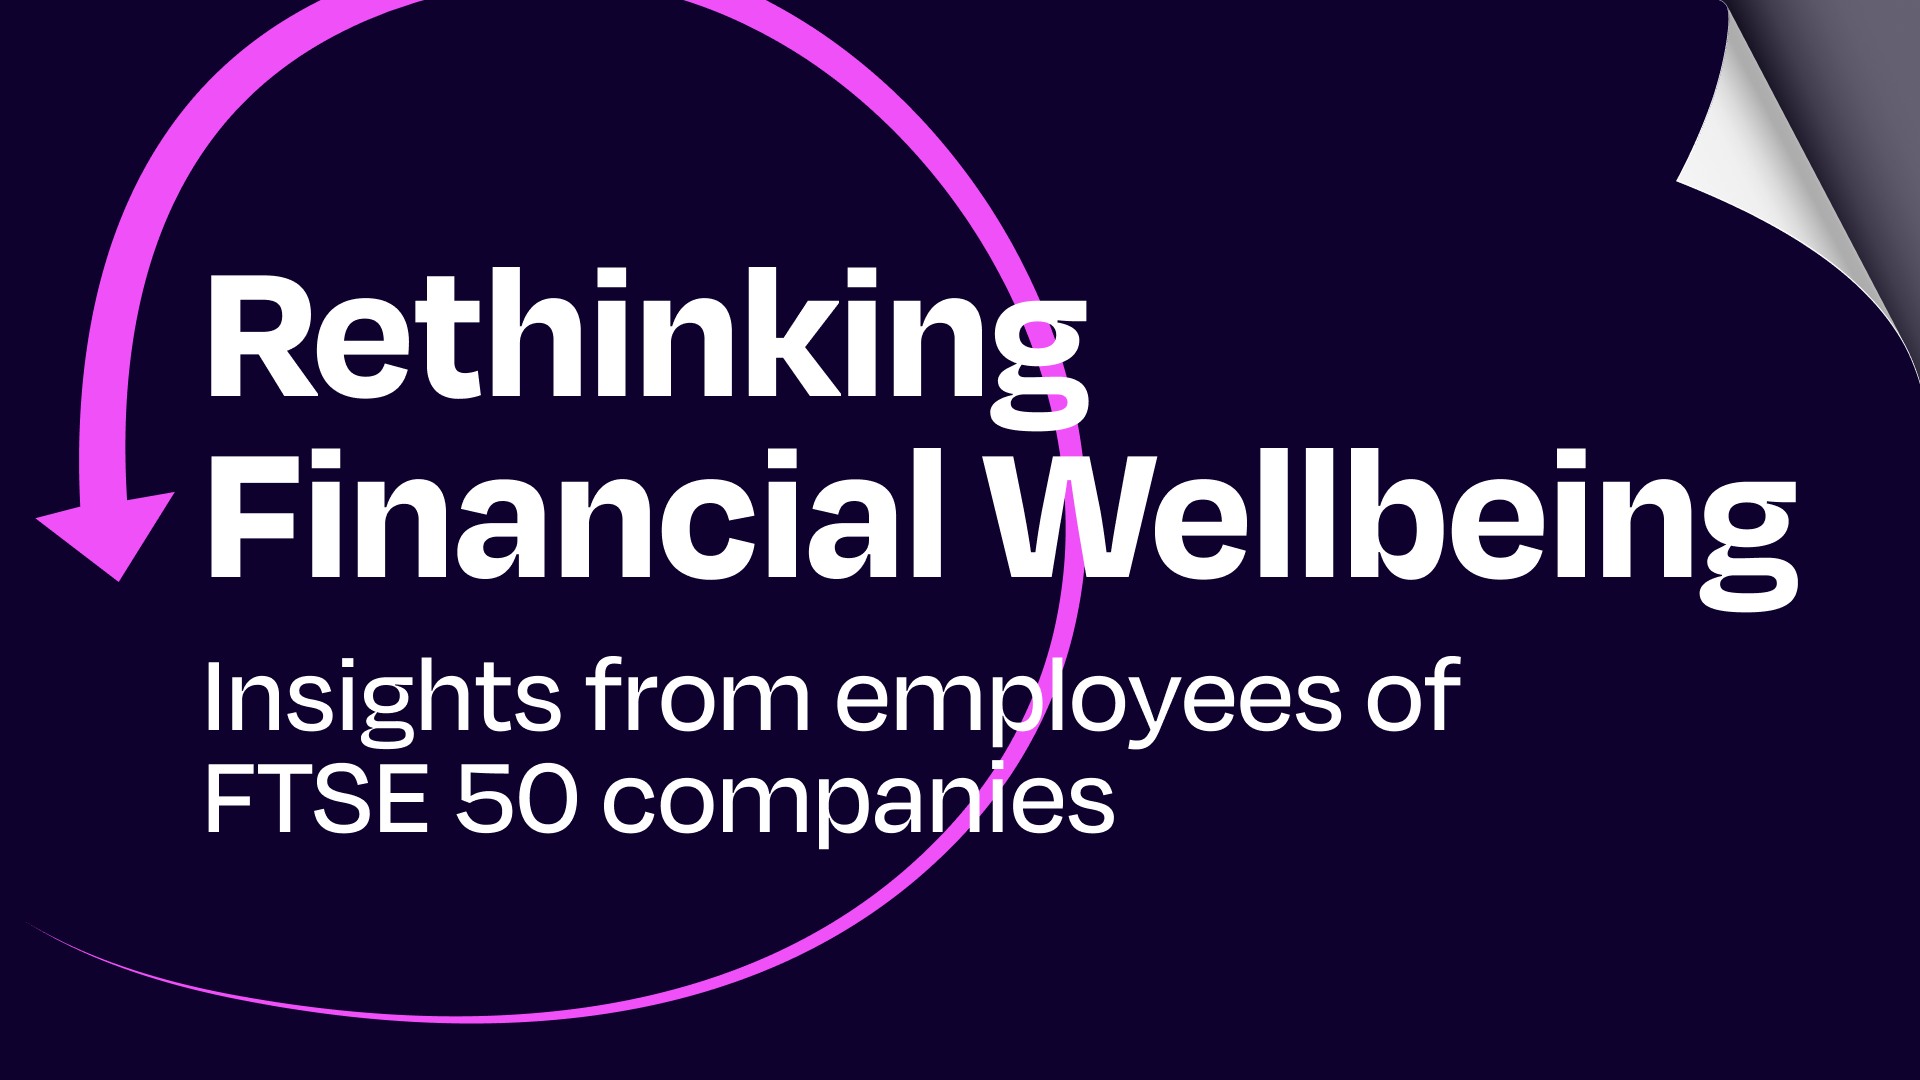 Insights from Employees of FTSE 50 Companies